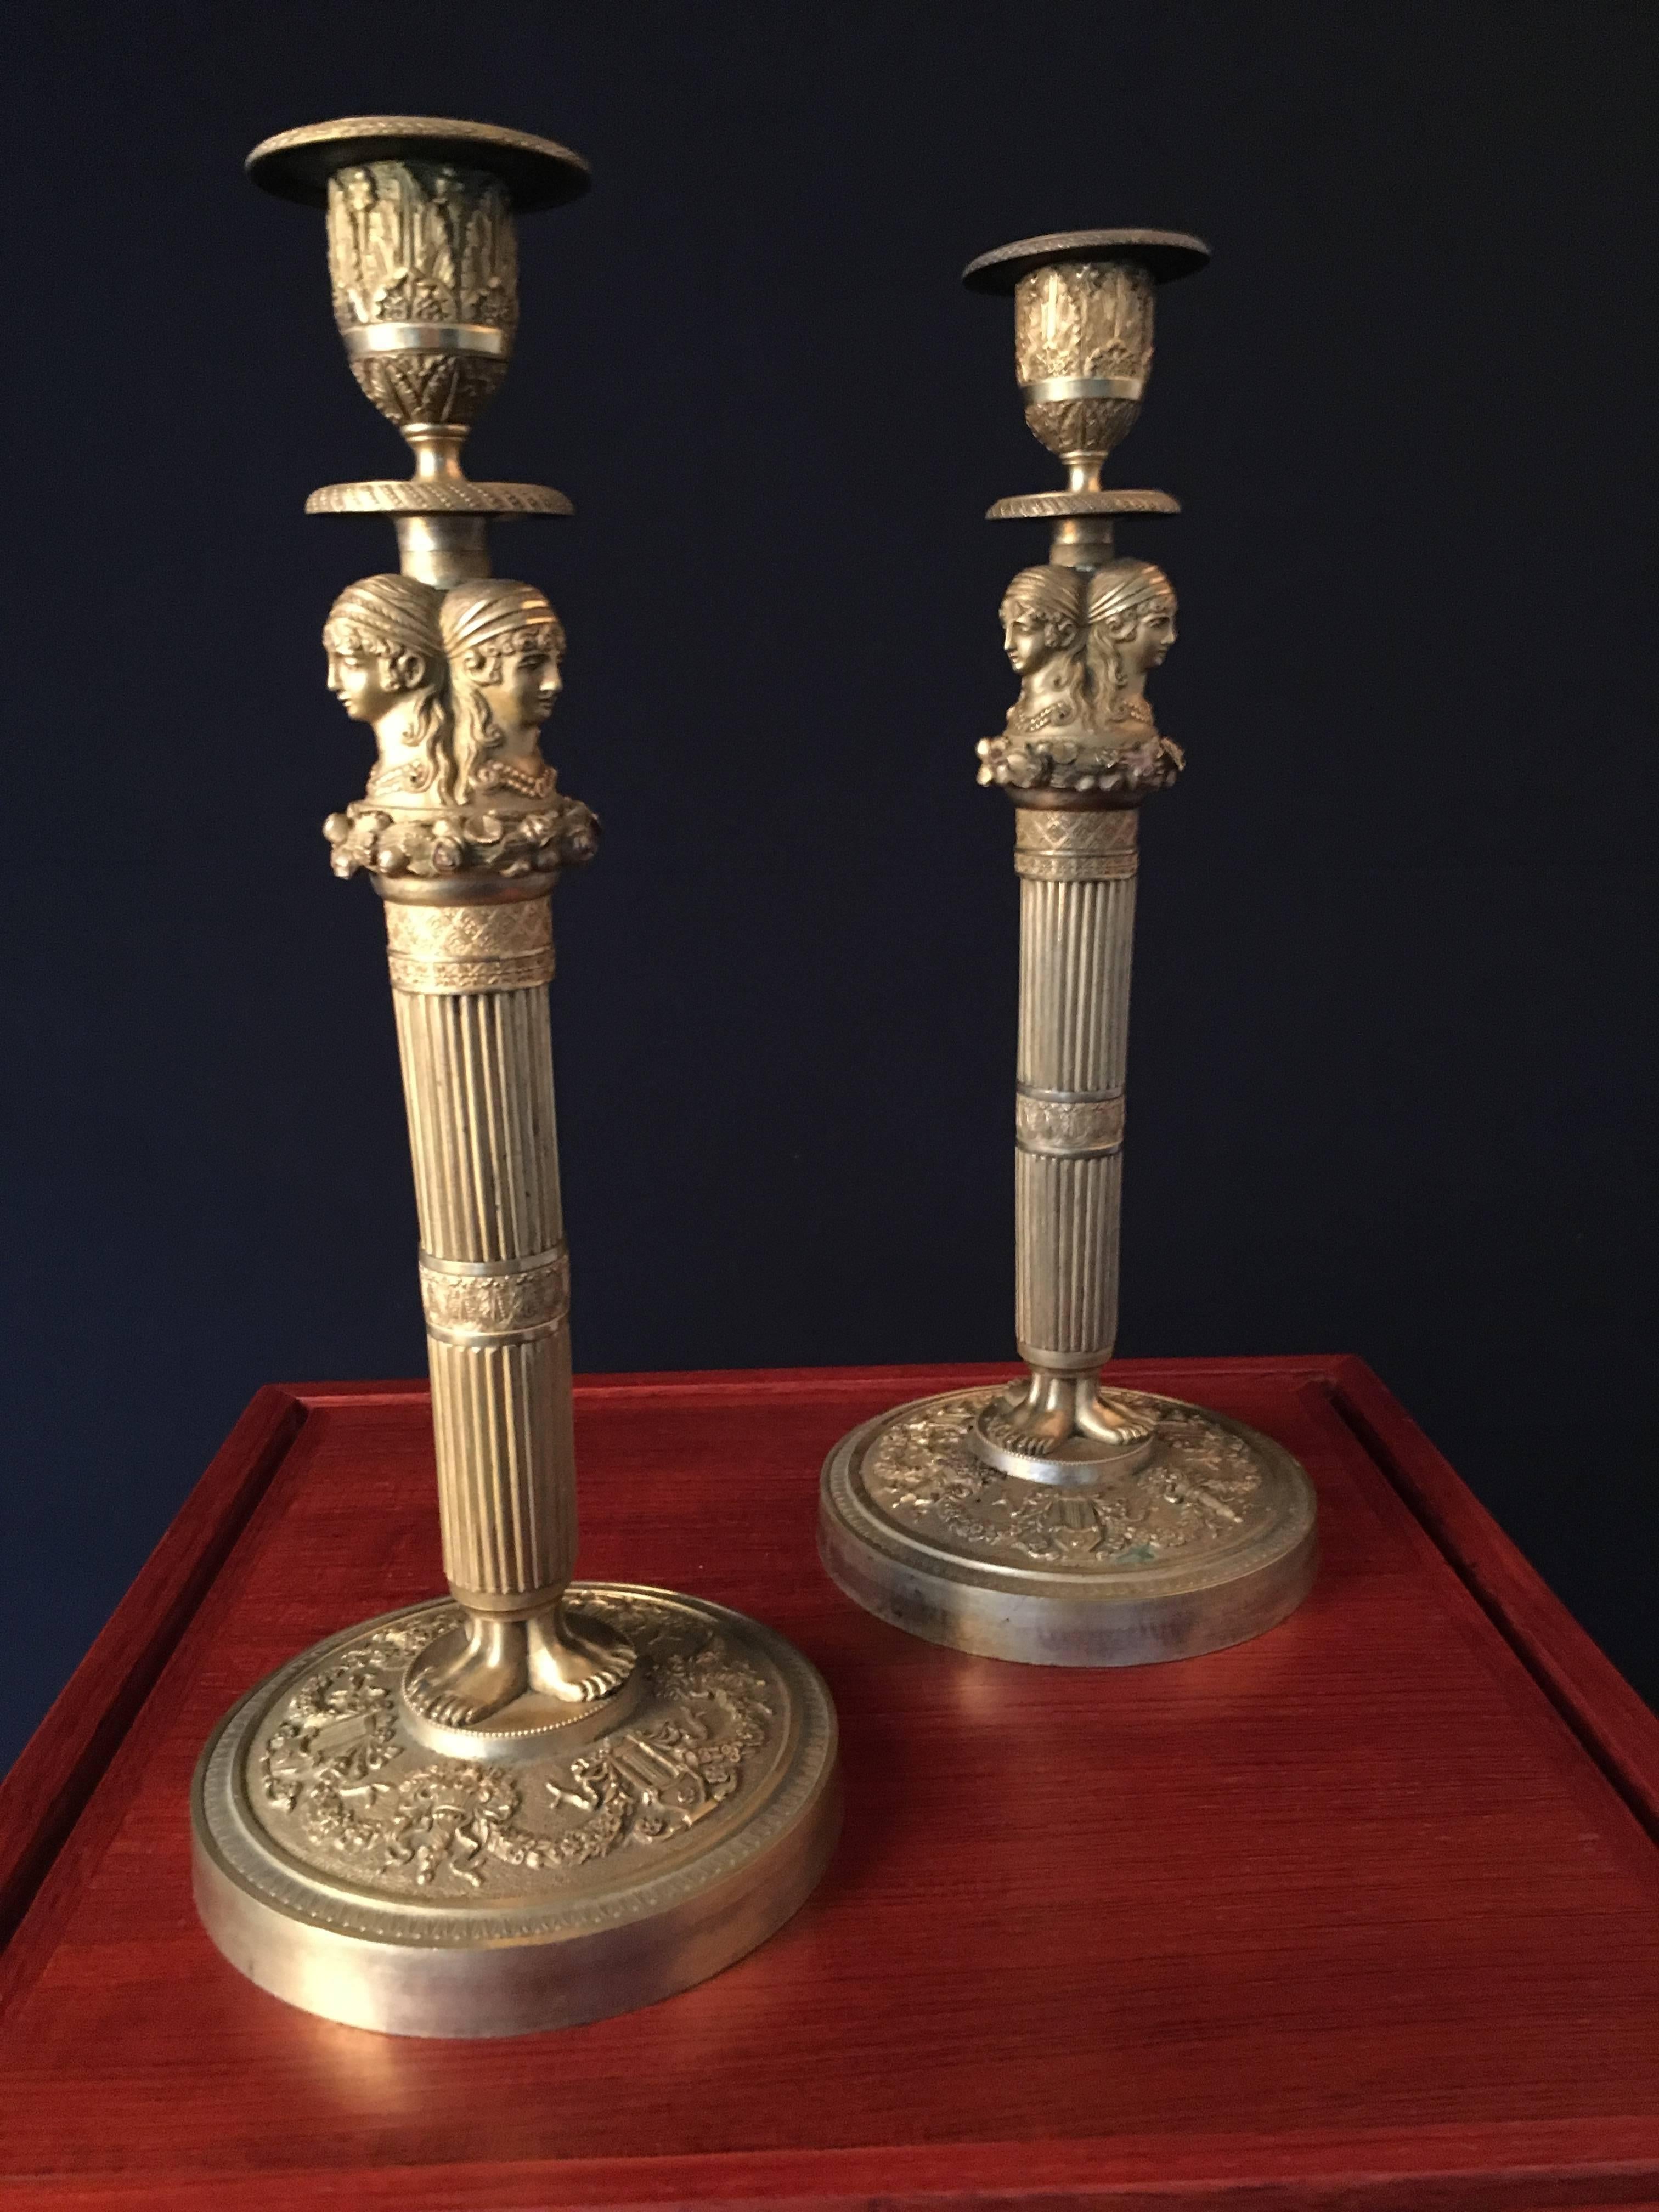 Pair of gilded and sculpted bronze candlesticks from the Empire period.
Beneath the socket, three female busts face outward, the foot of the barrel is decorated with three sets of feet on a circular base.
Sculpting is of very high quality, and